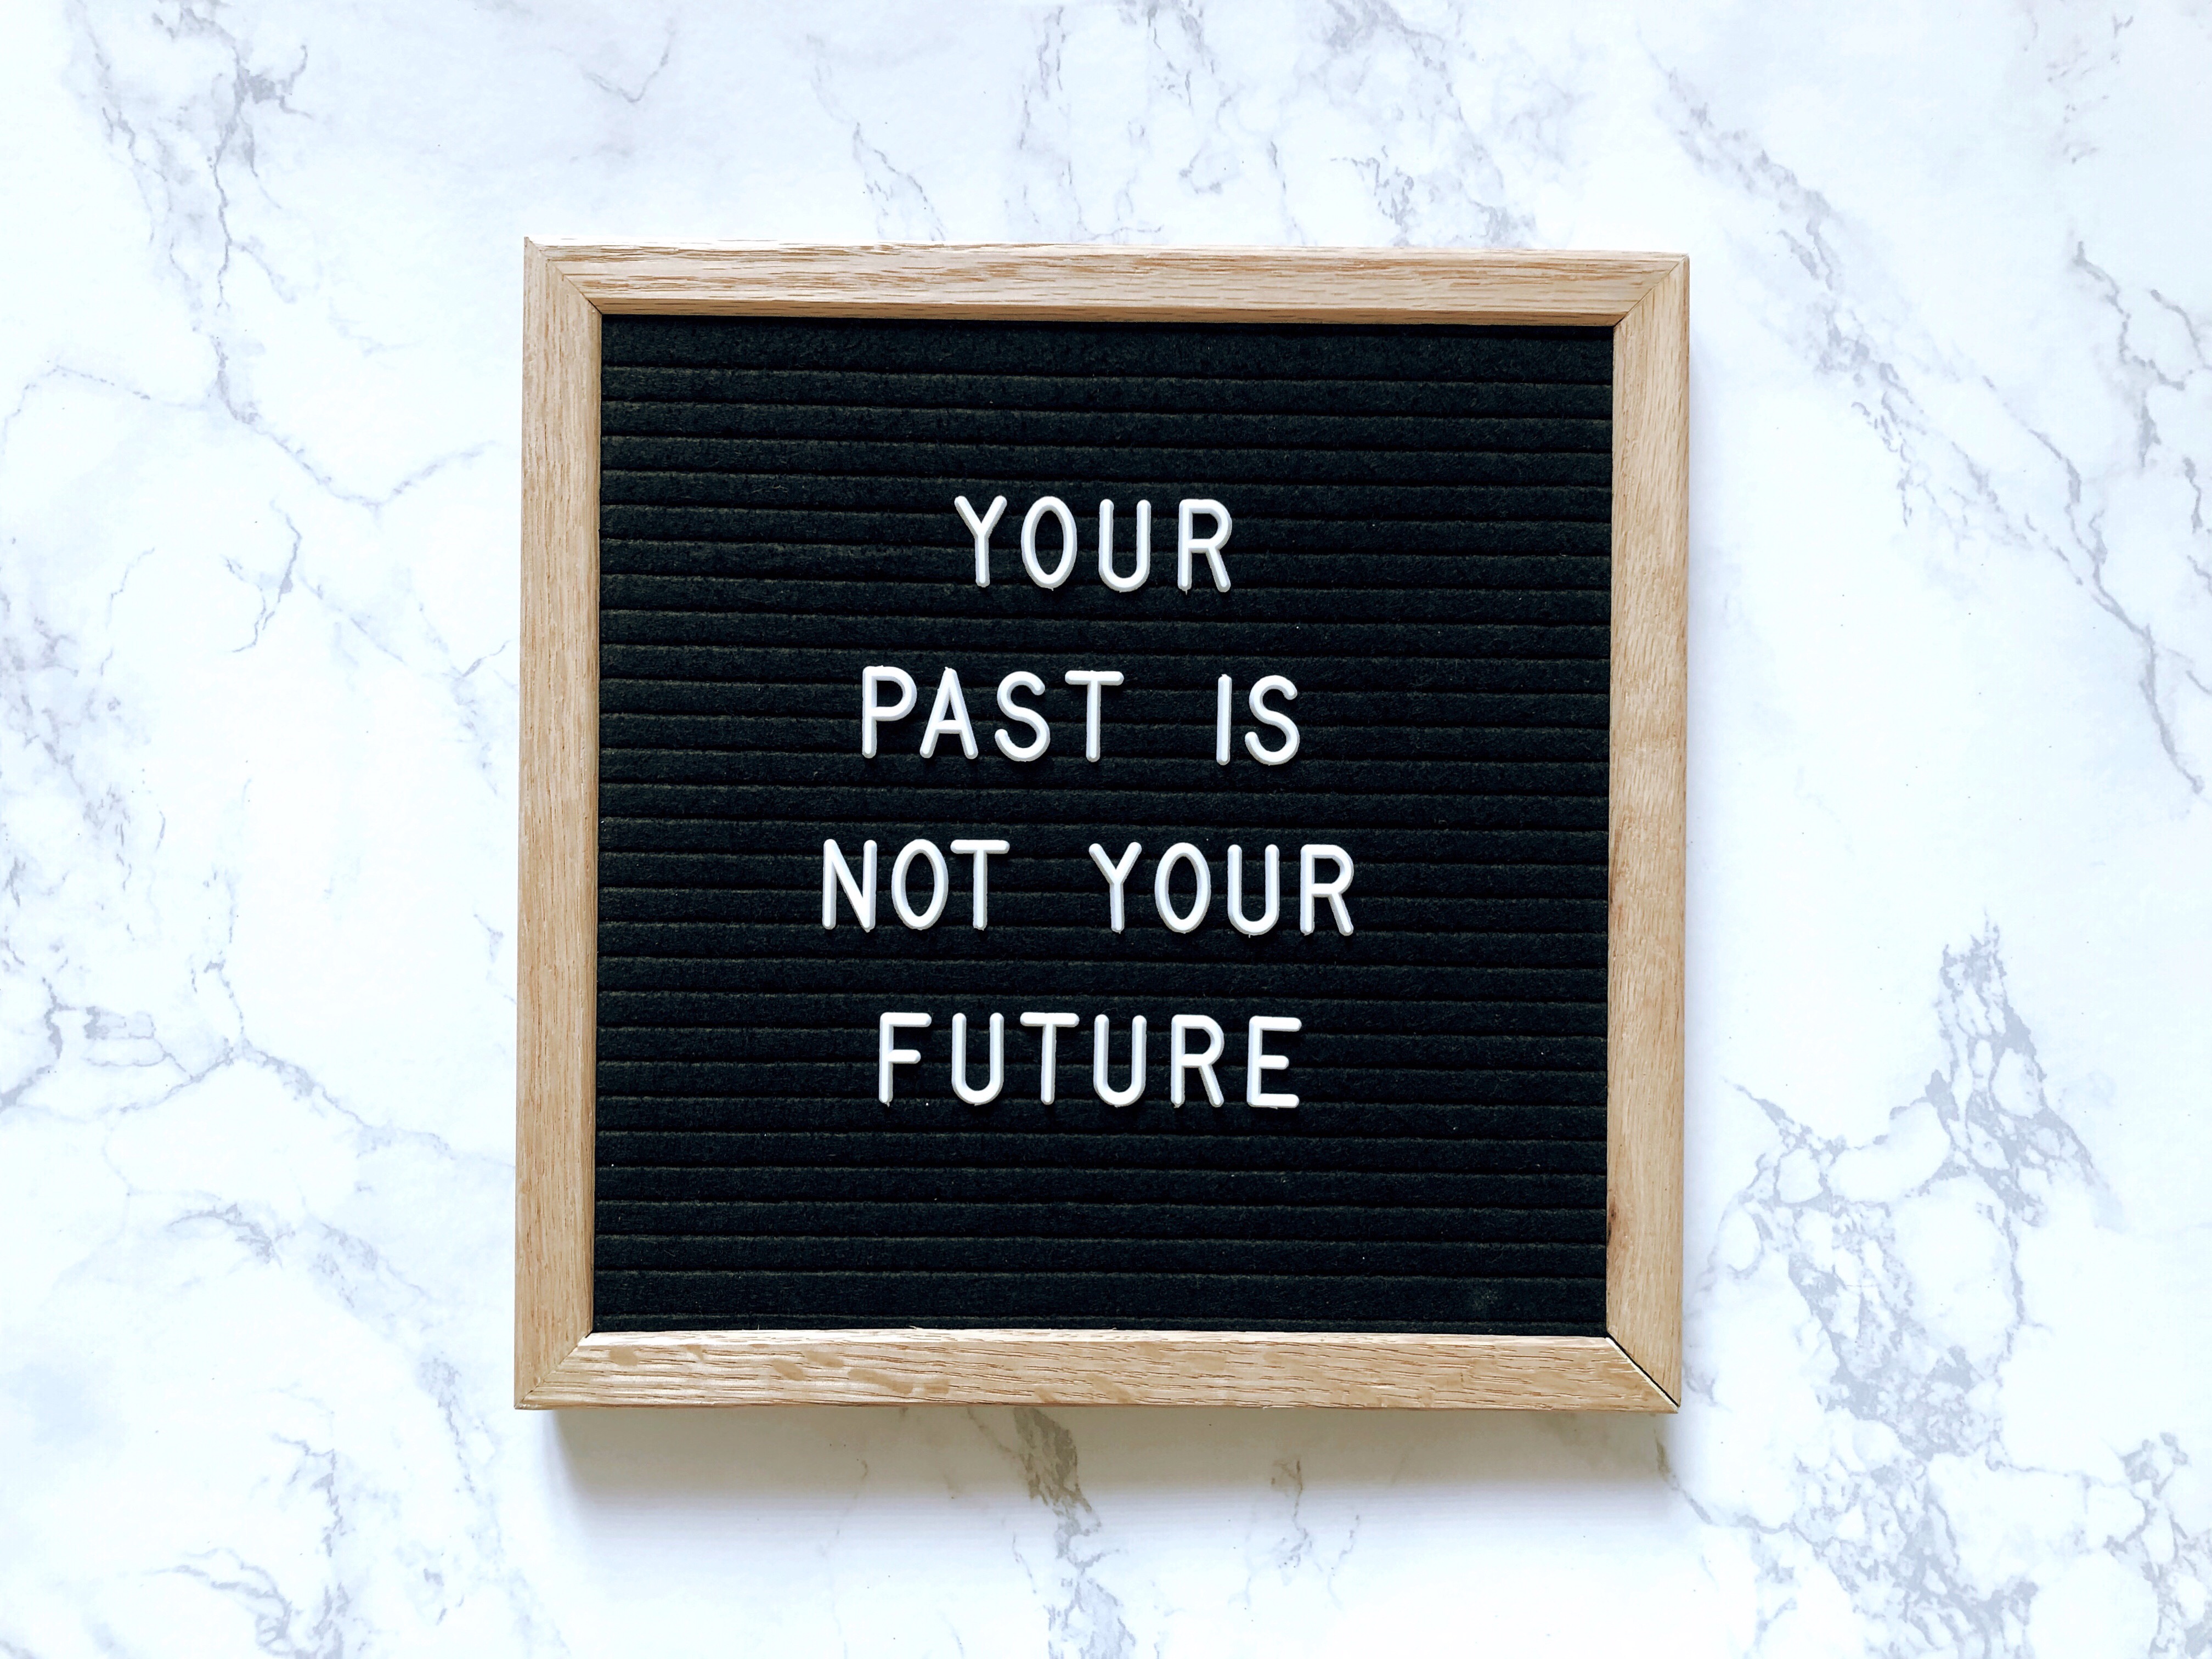 Life lesson: Your past is not your future